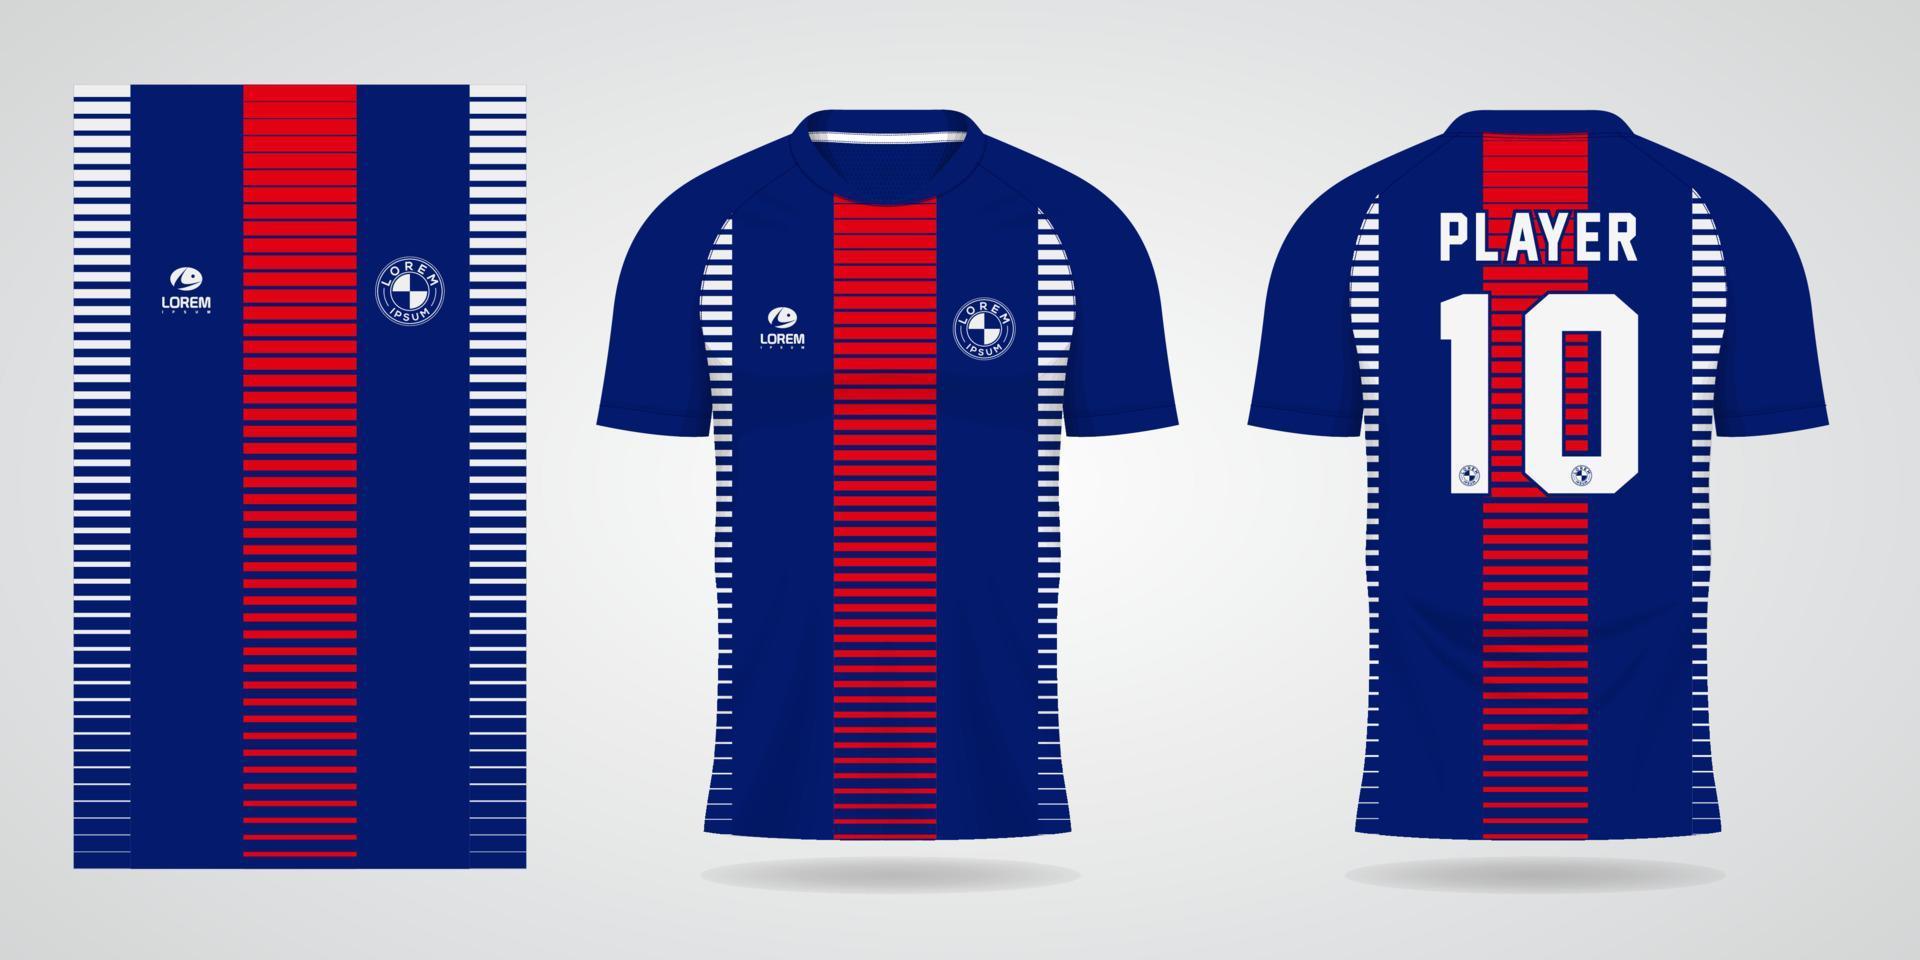 red blue jersey template for team uniforms and Soccer t shirt design vector